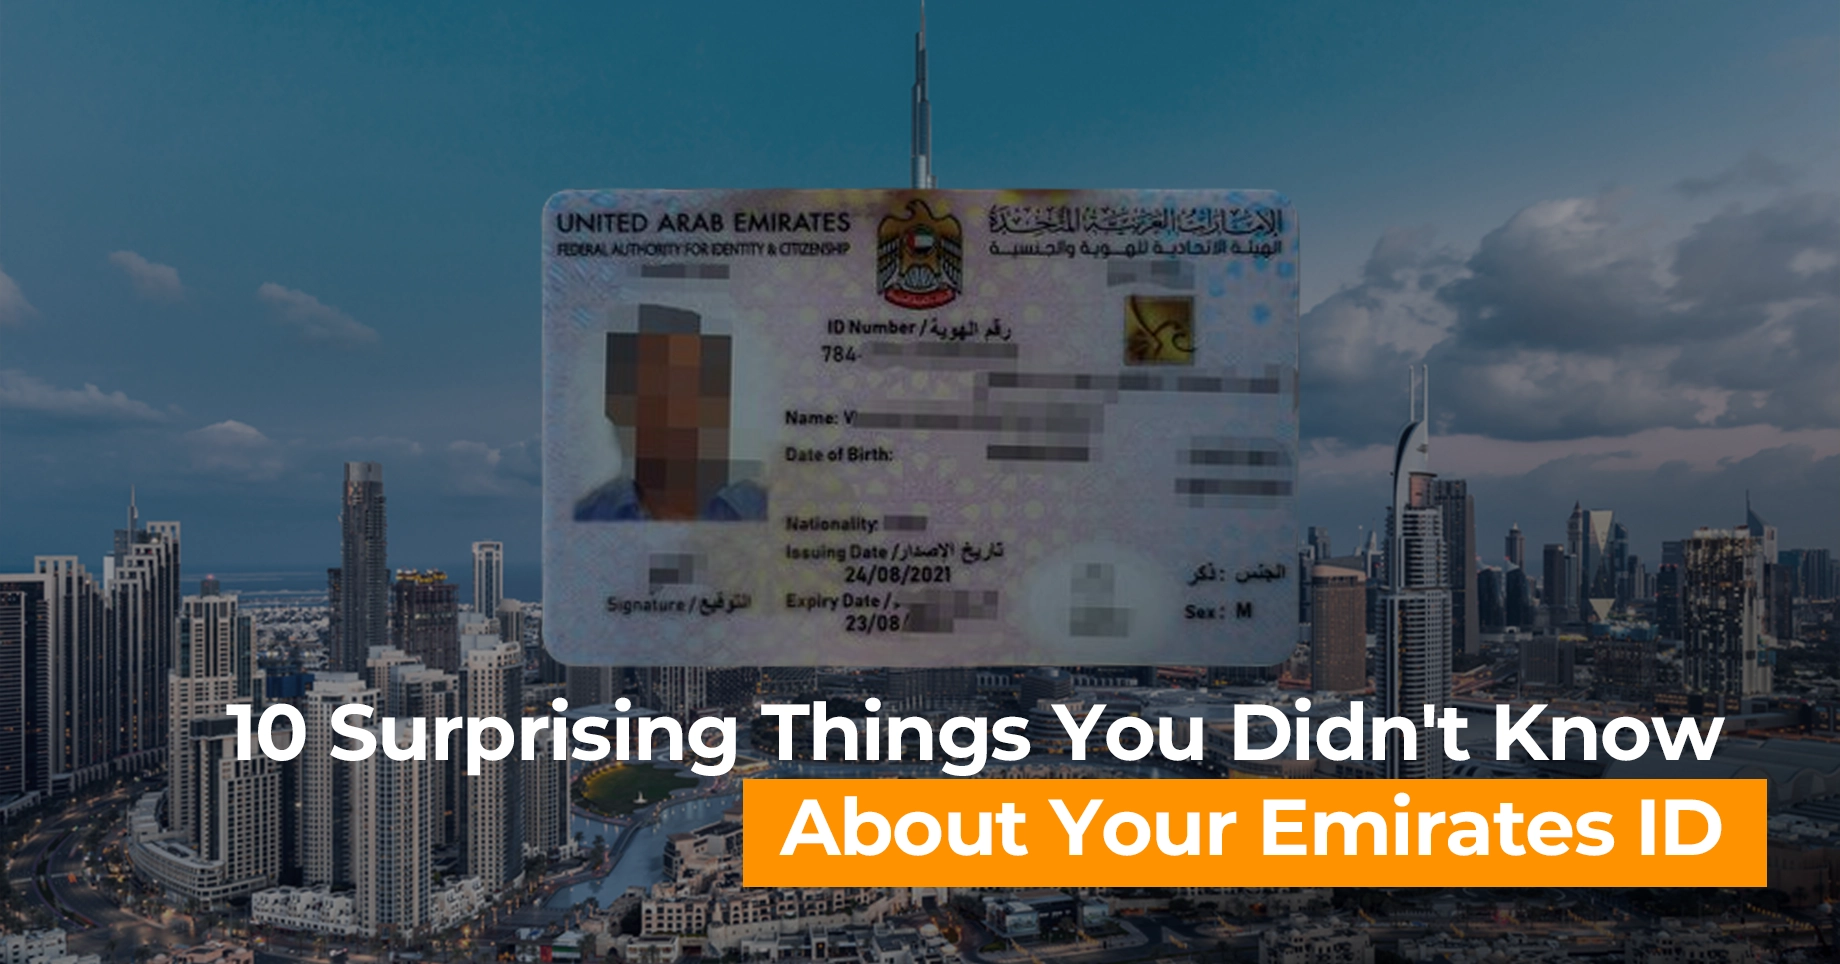 10 Surprising Things You Didn't Know About Your Emirates ID